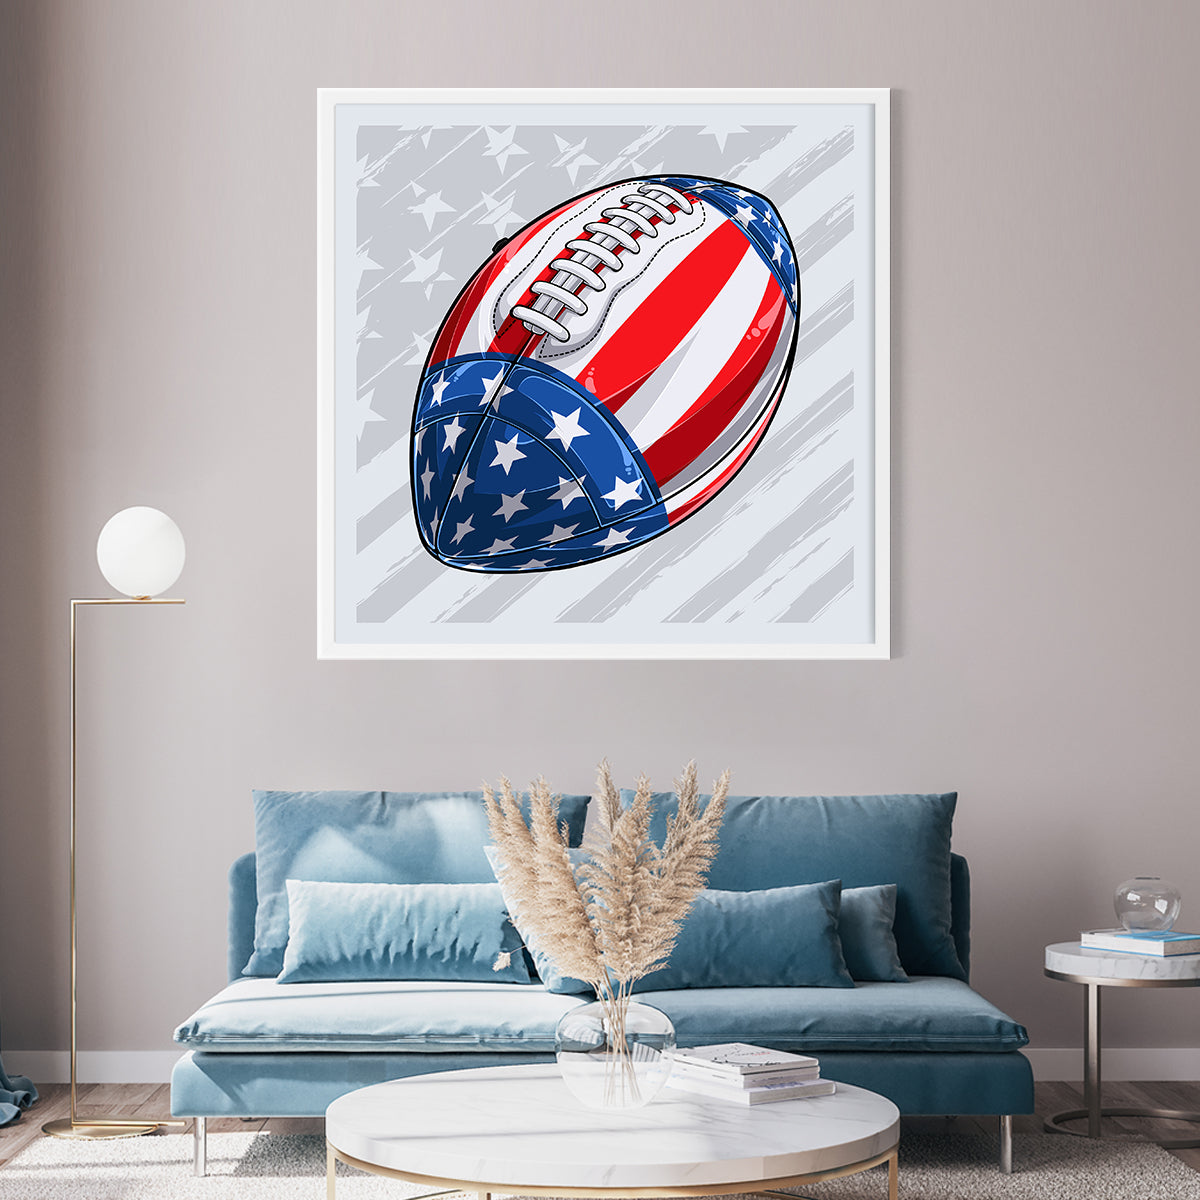 American Football Ball with USA Flag Poster Decorations Ideas-Square Posters NOT FRAMED-CetArt-8″x8″ inches-CetArt